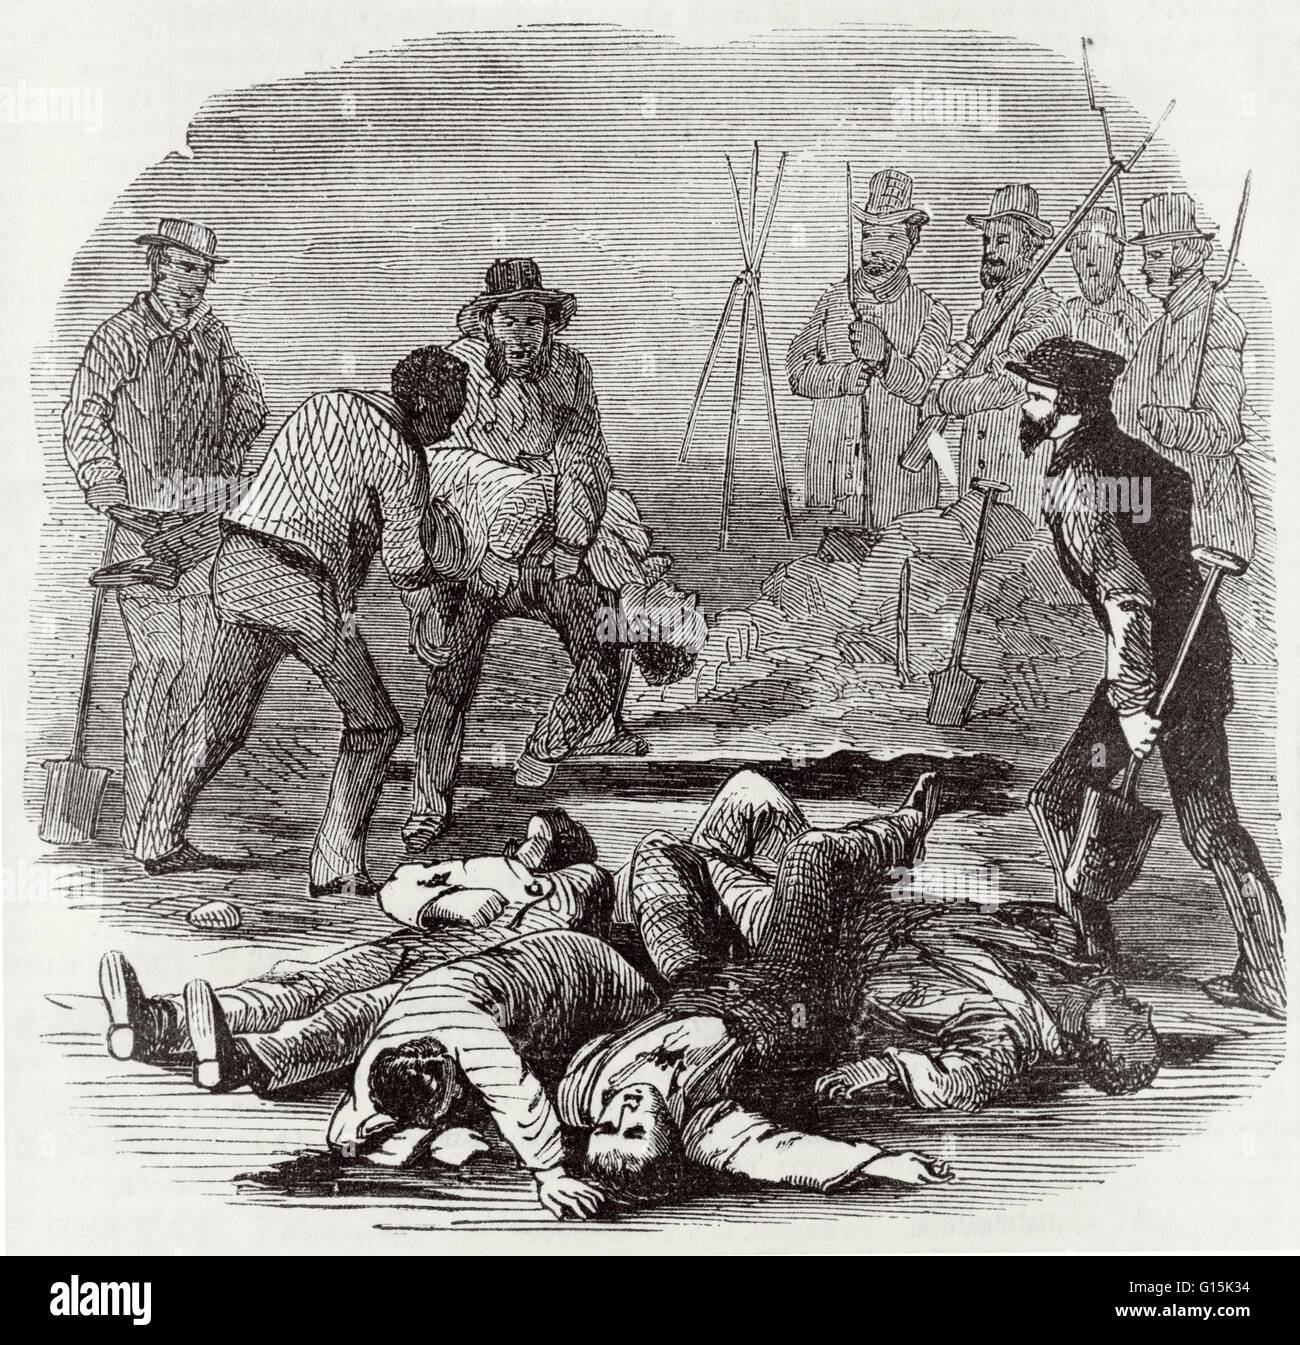 Illustration showing the burial of dead insurgents killed at John Brown's raid on Harpers Ferry. The raid was an attempt by white abolitionist John Brown to start an armed slave revolt by seizing a United States Arsenal at Harpers Ferry in Virginia in 185 Stock Photo